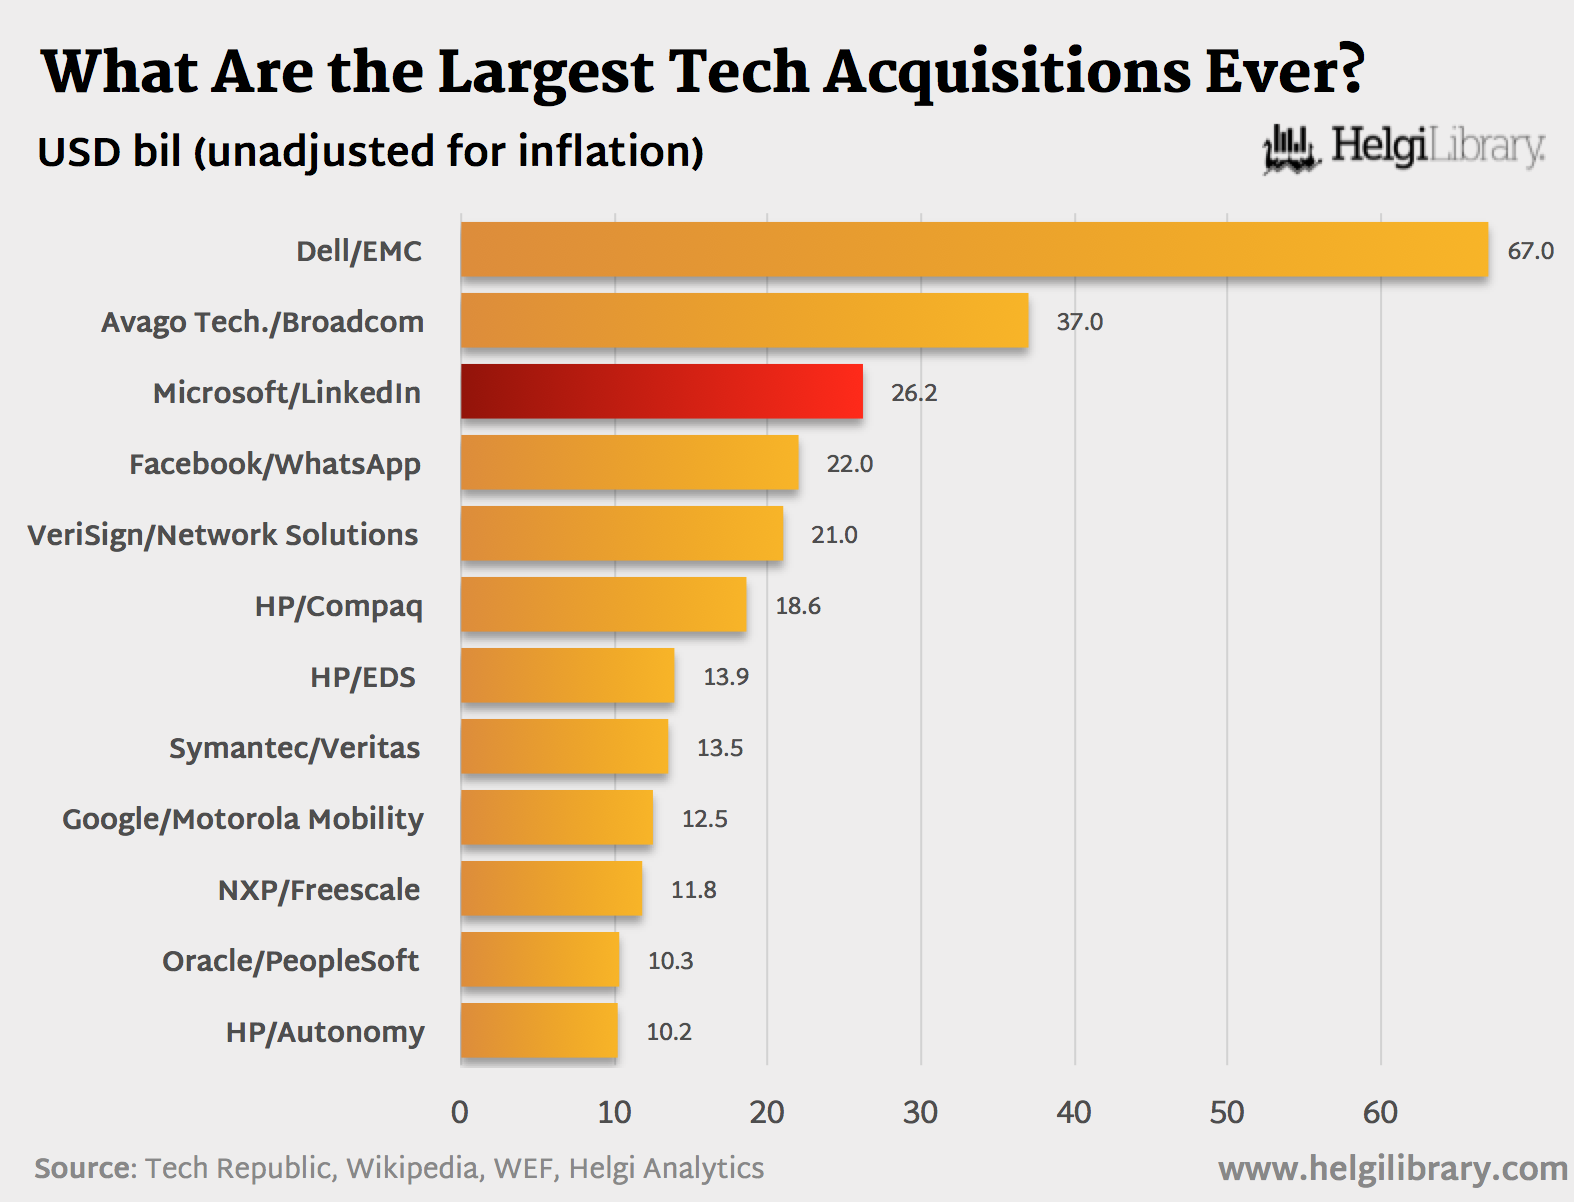 What Are the Largest Tech Acquisitions? Helgi Library